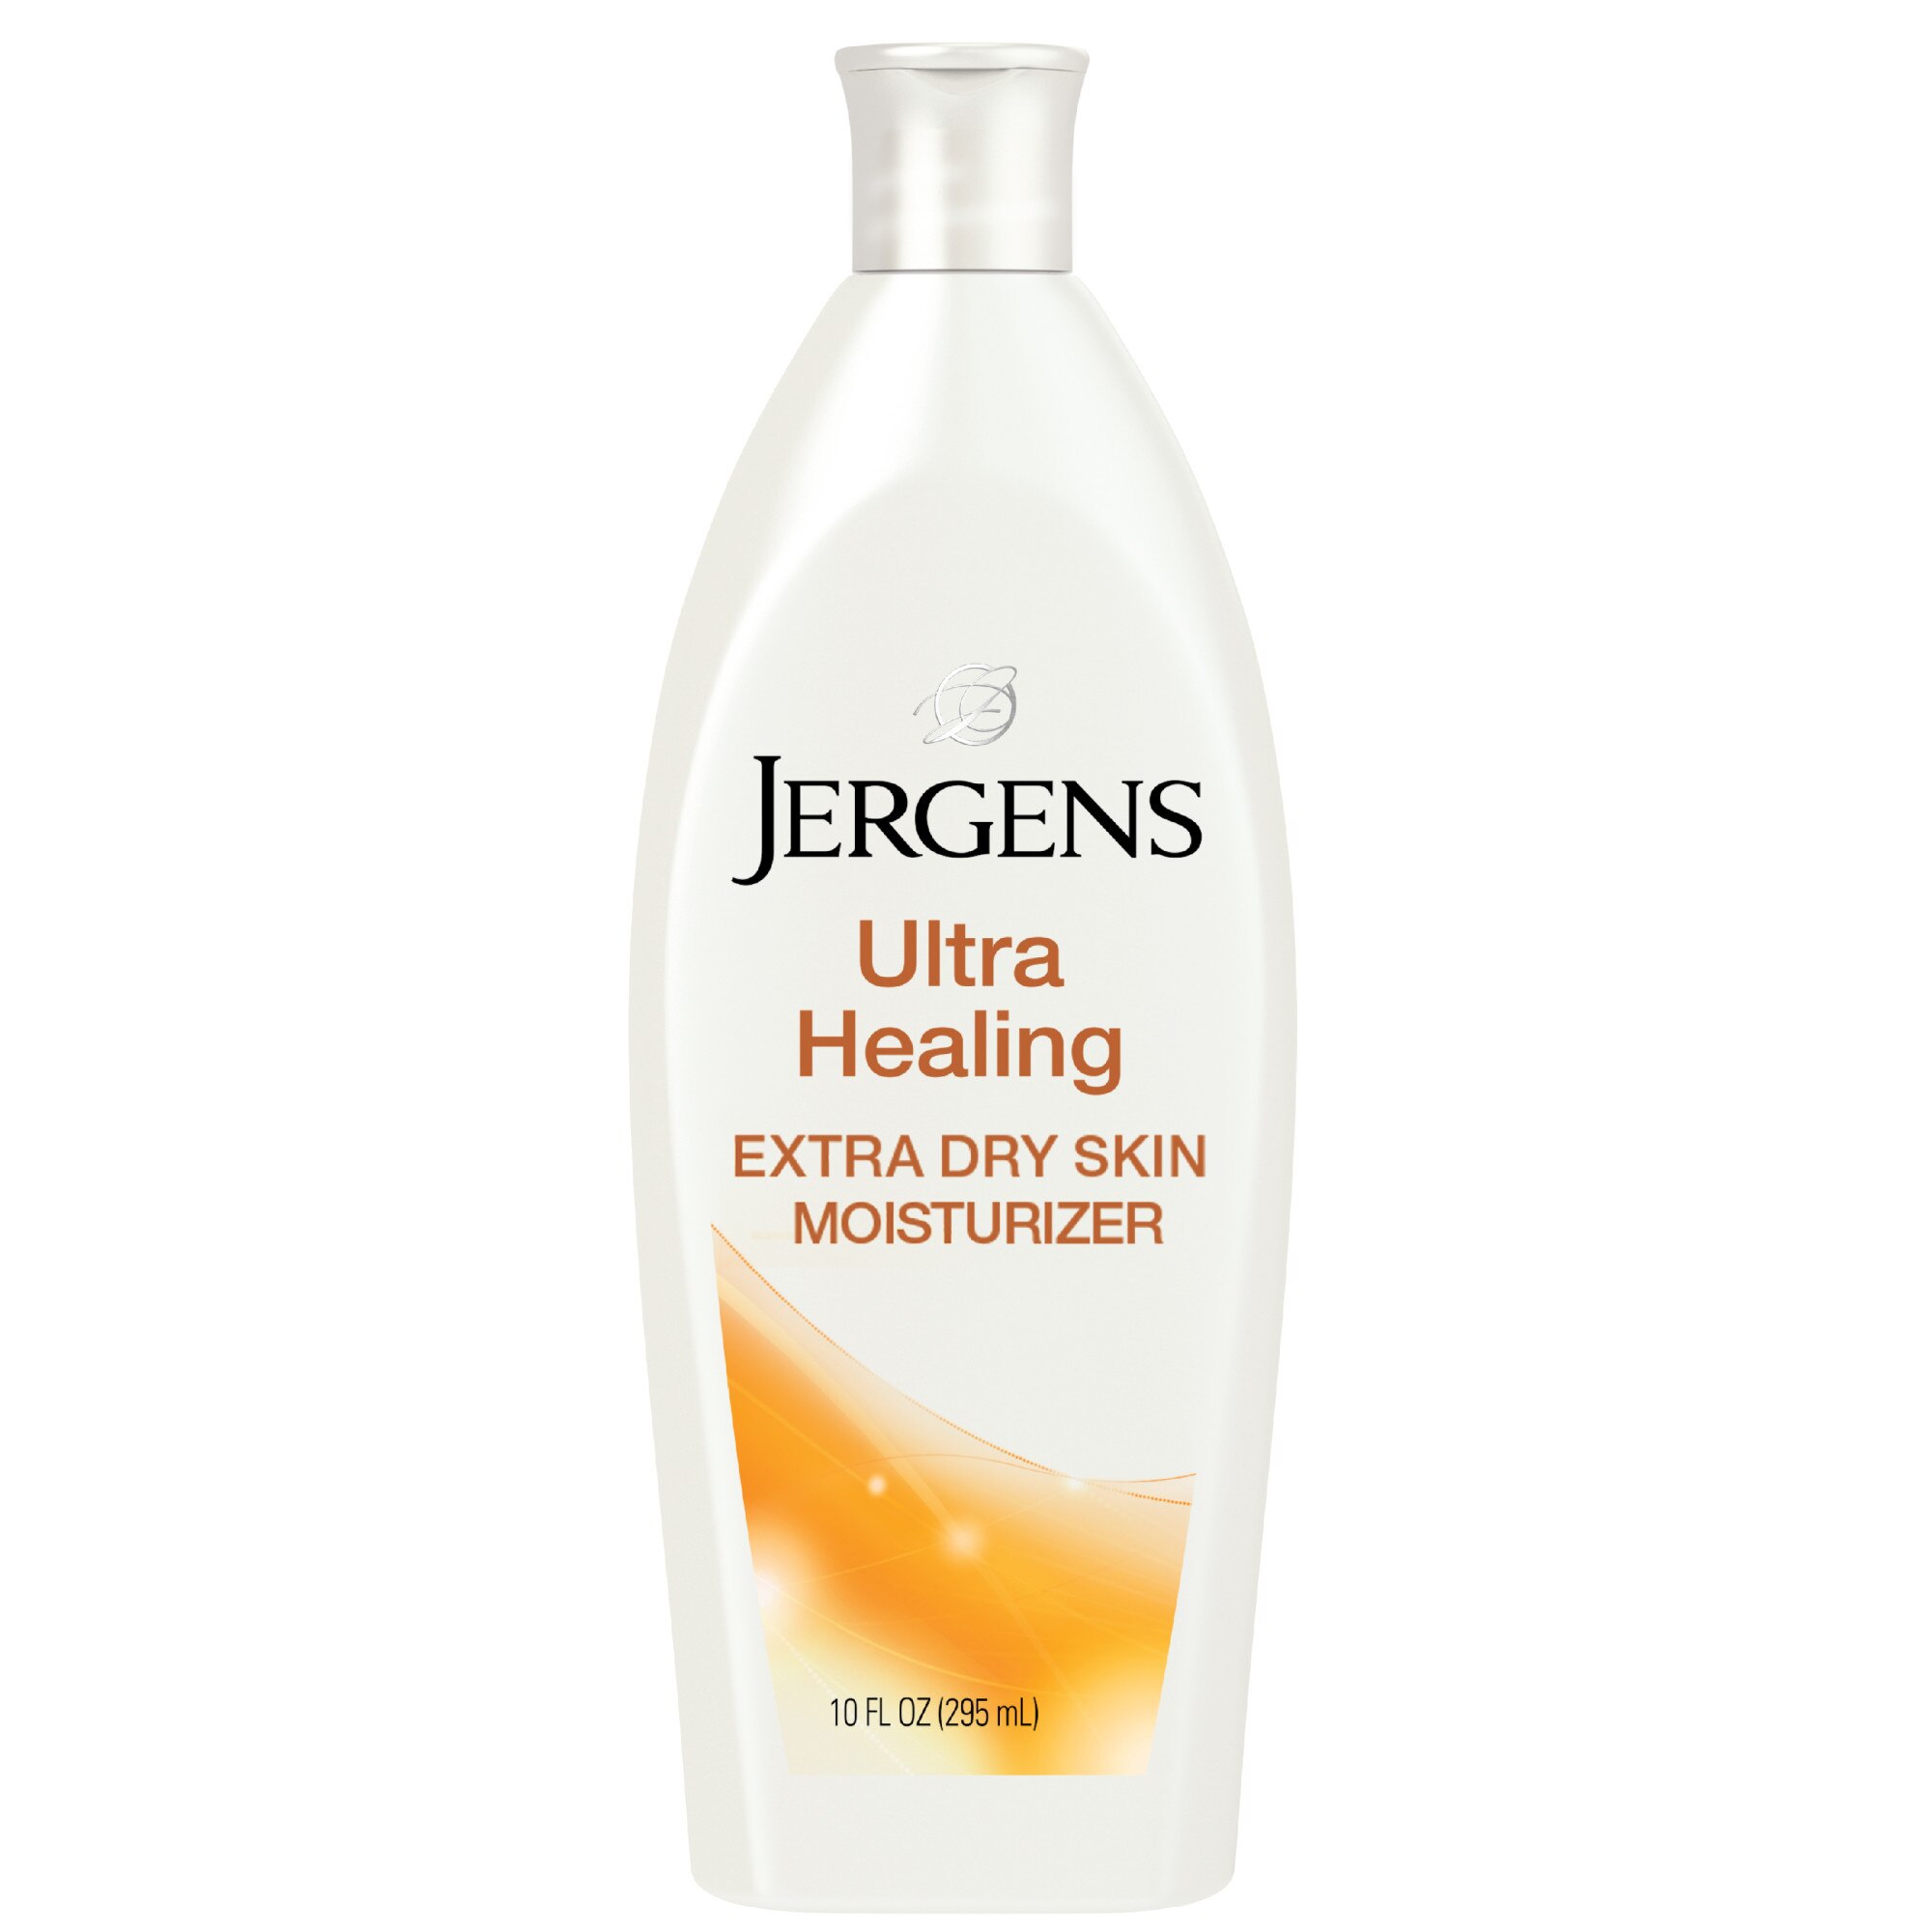 Jergens Ultra Healing Hand and Body Lotion, Dry Skin Moisturizer with Vitamins C,E, and B5, 10 OZ